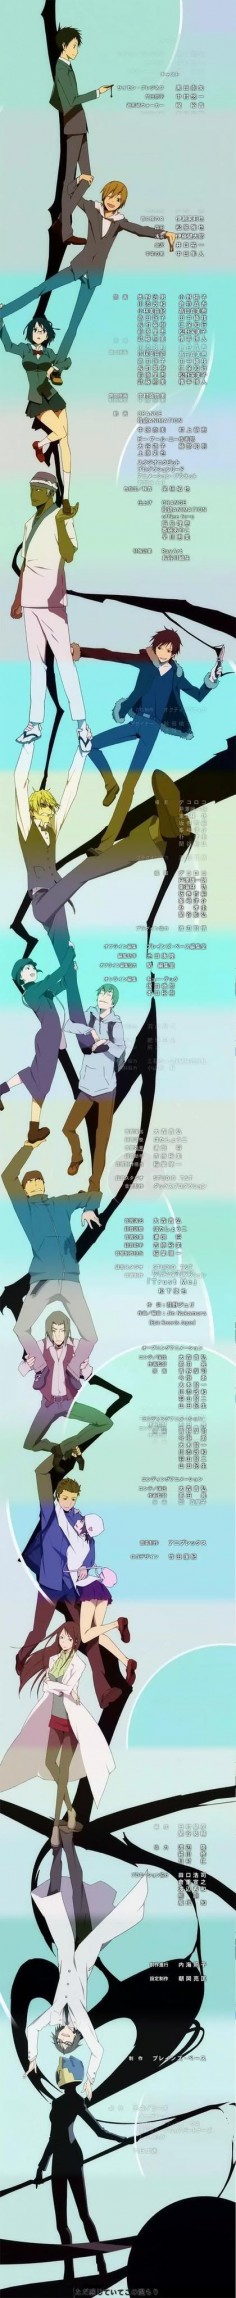 THIS IS THE ORIGINAL!!! I swear the other day some idiot said that this was an original Bleach ending.  I ♥ Durarara! ~